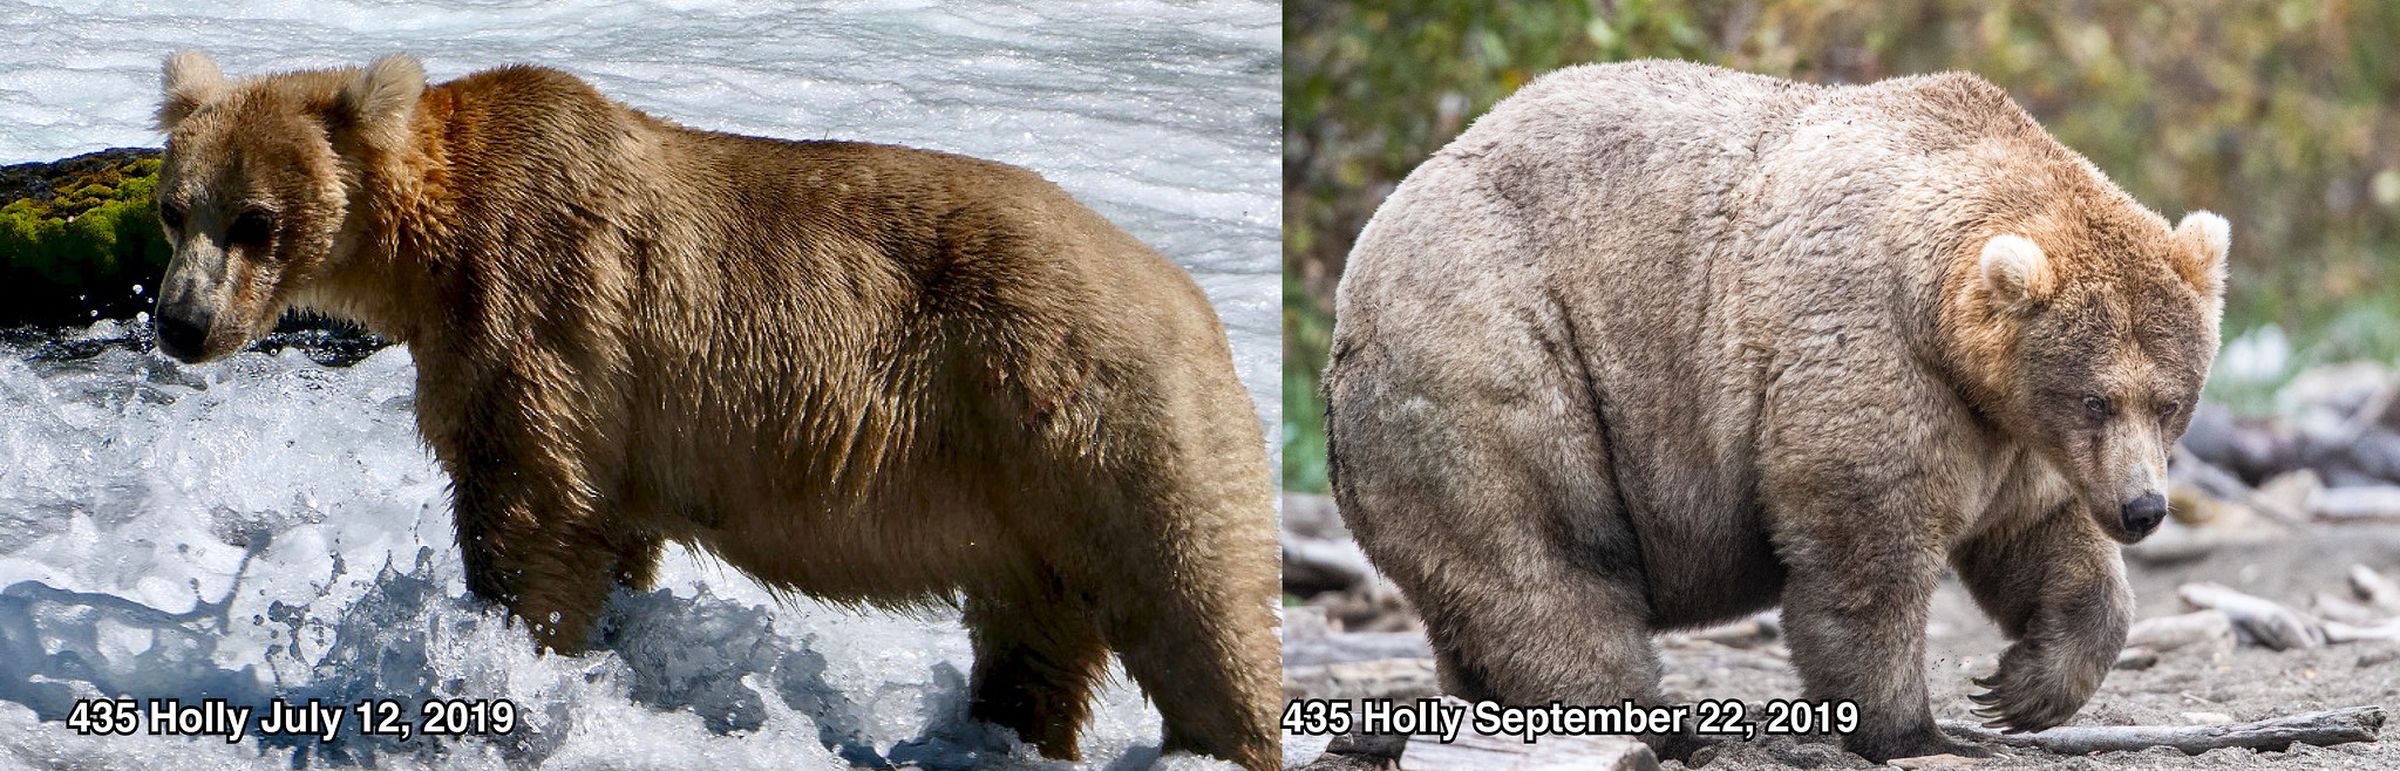 Fat Bear Week Champion Holly before and after plumping up on Brooks River Salmon